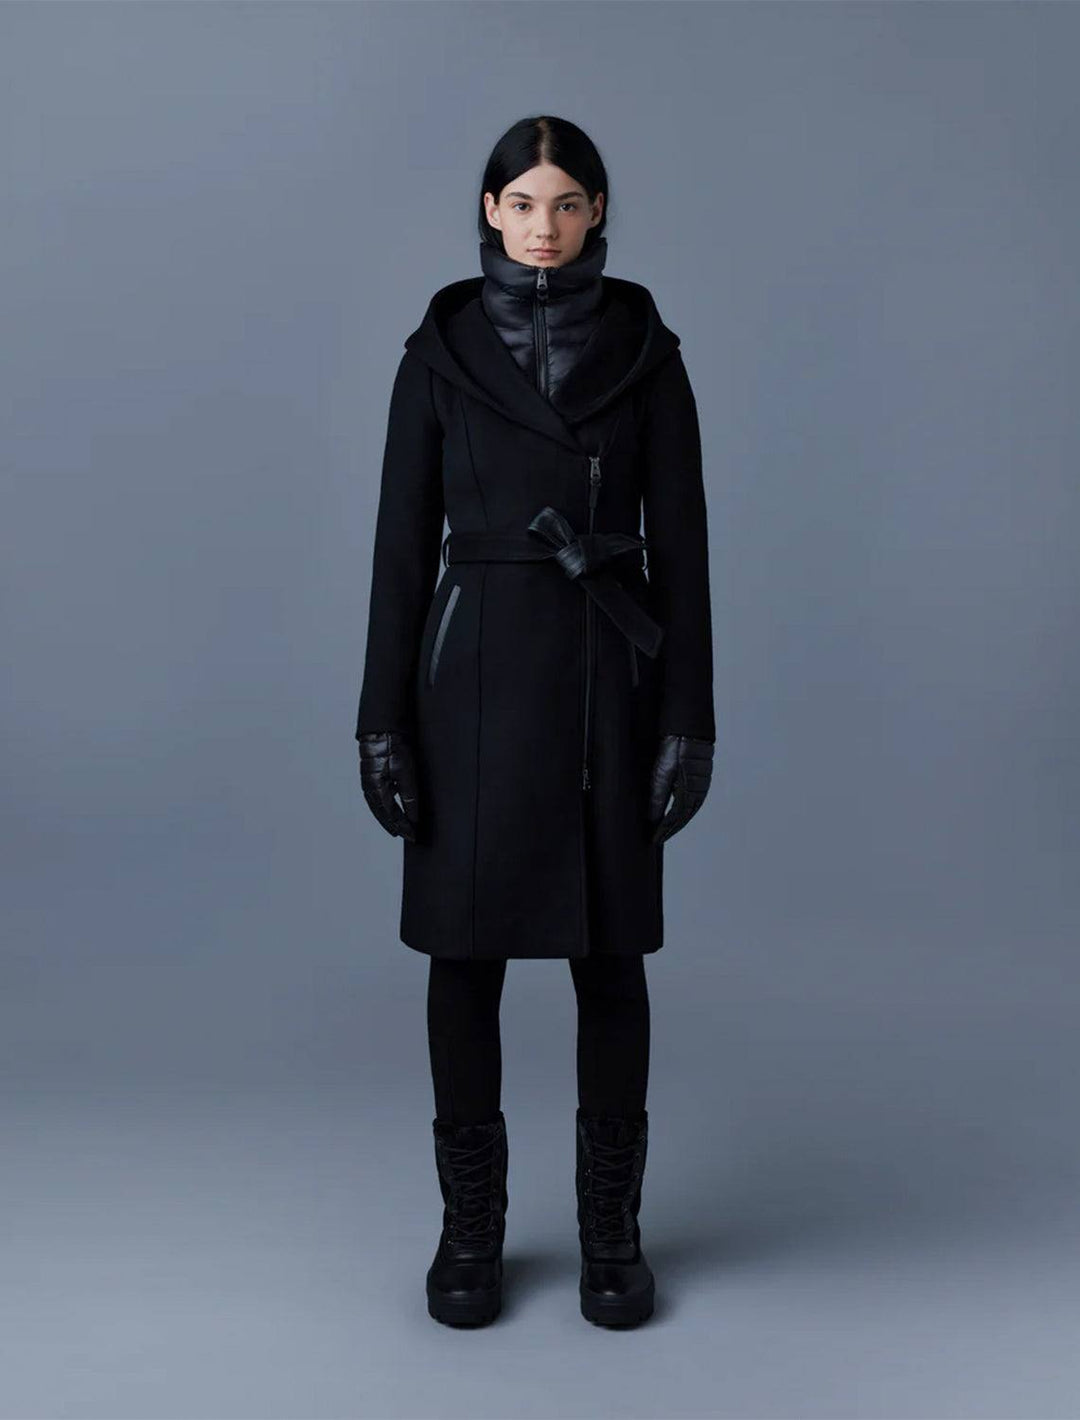 model wearing shia coat in black with leather trim with black gloves, pants, and boots